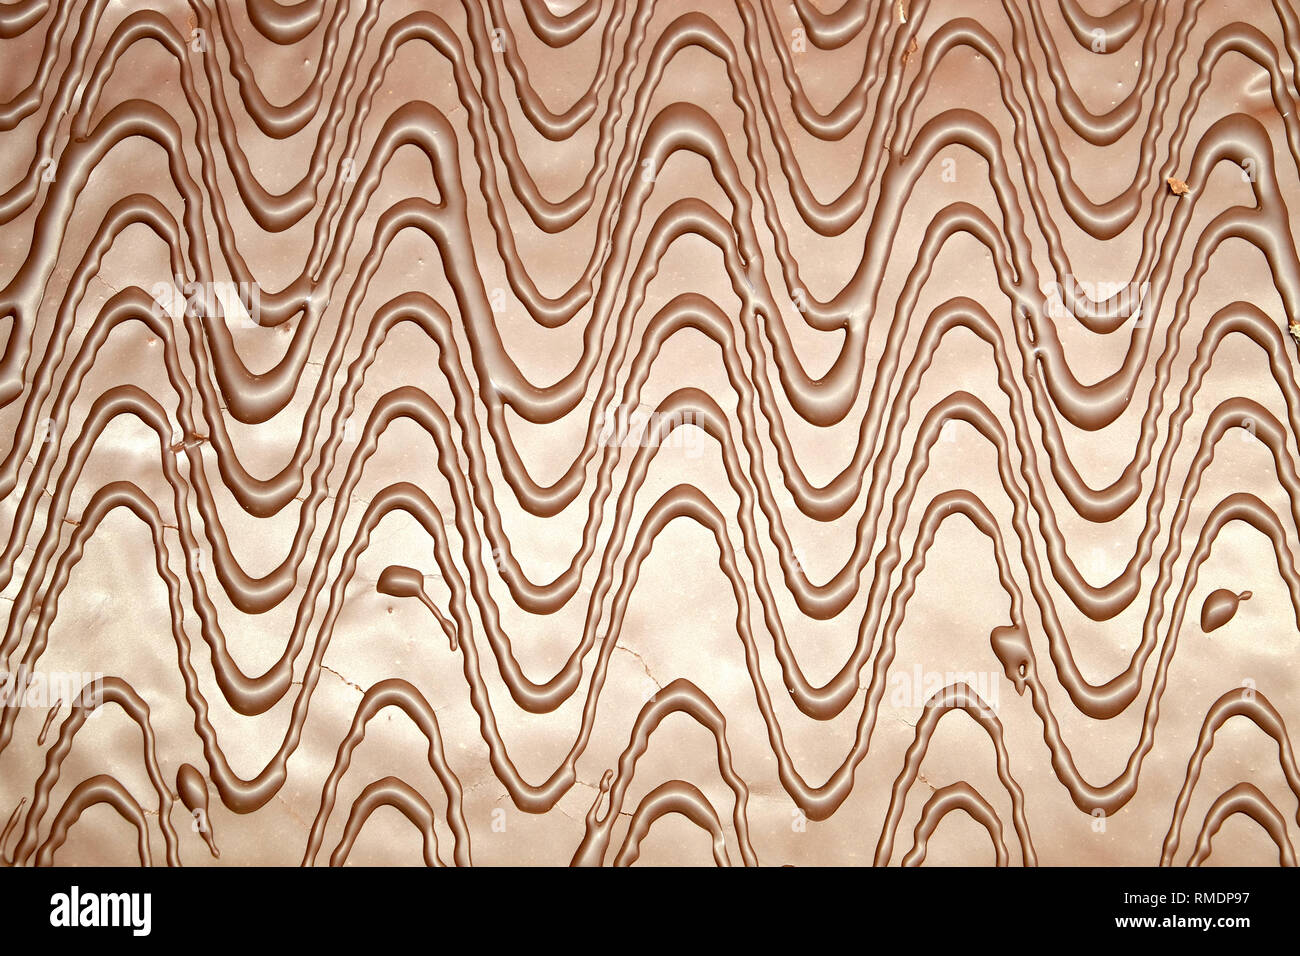 Brown chocolate abstract pattern as background front view horizontal closeup Stock Photo